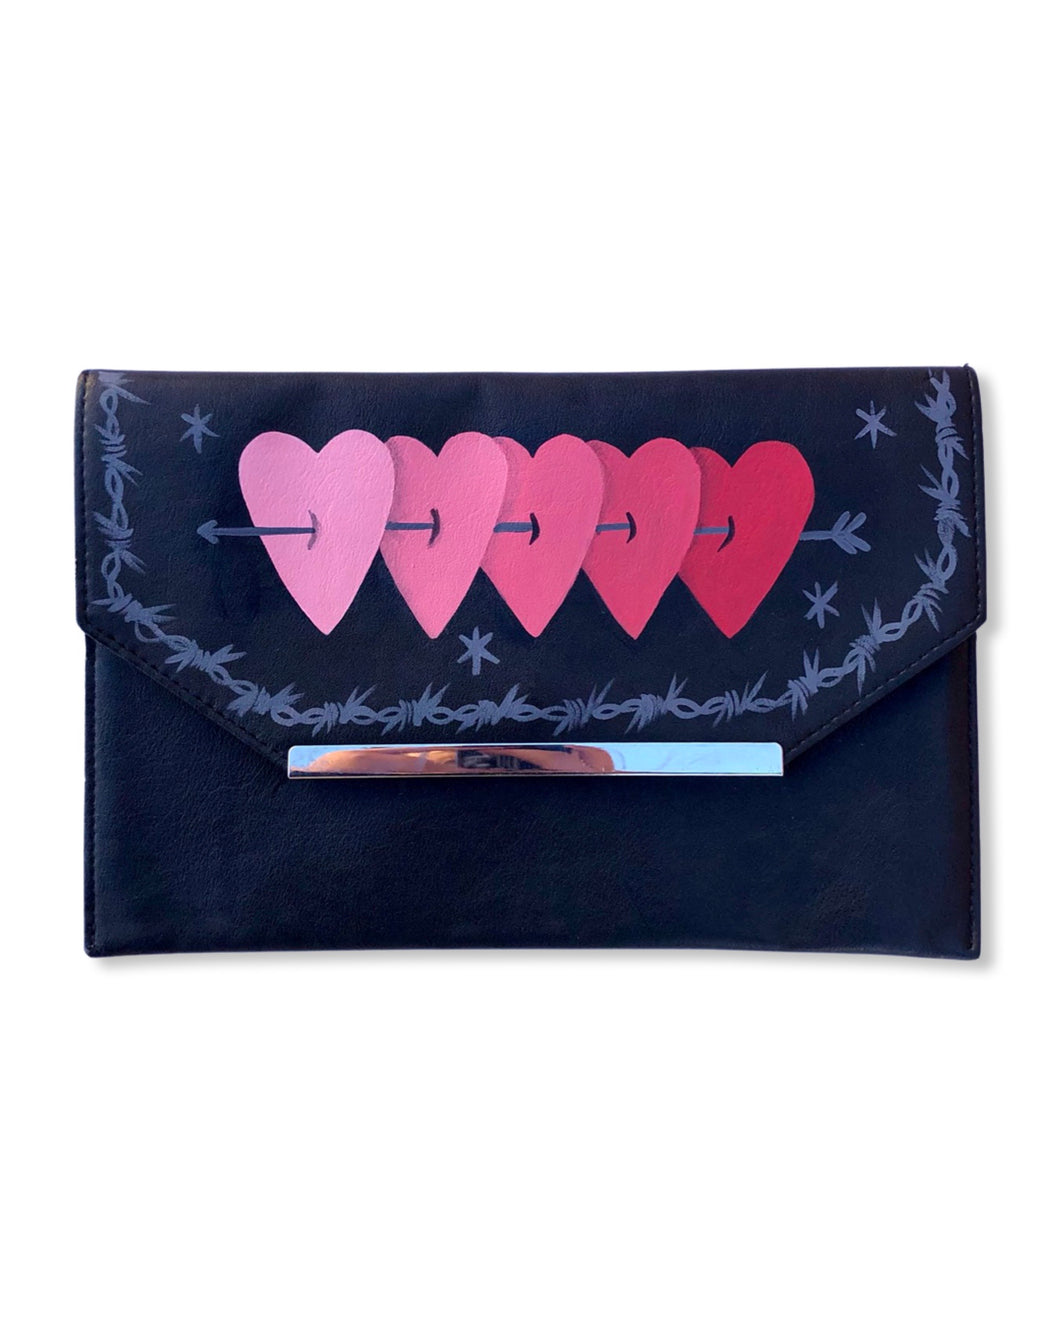 Upcycled Love Struck Clutch 1 of 1